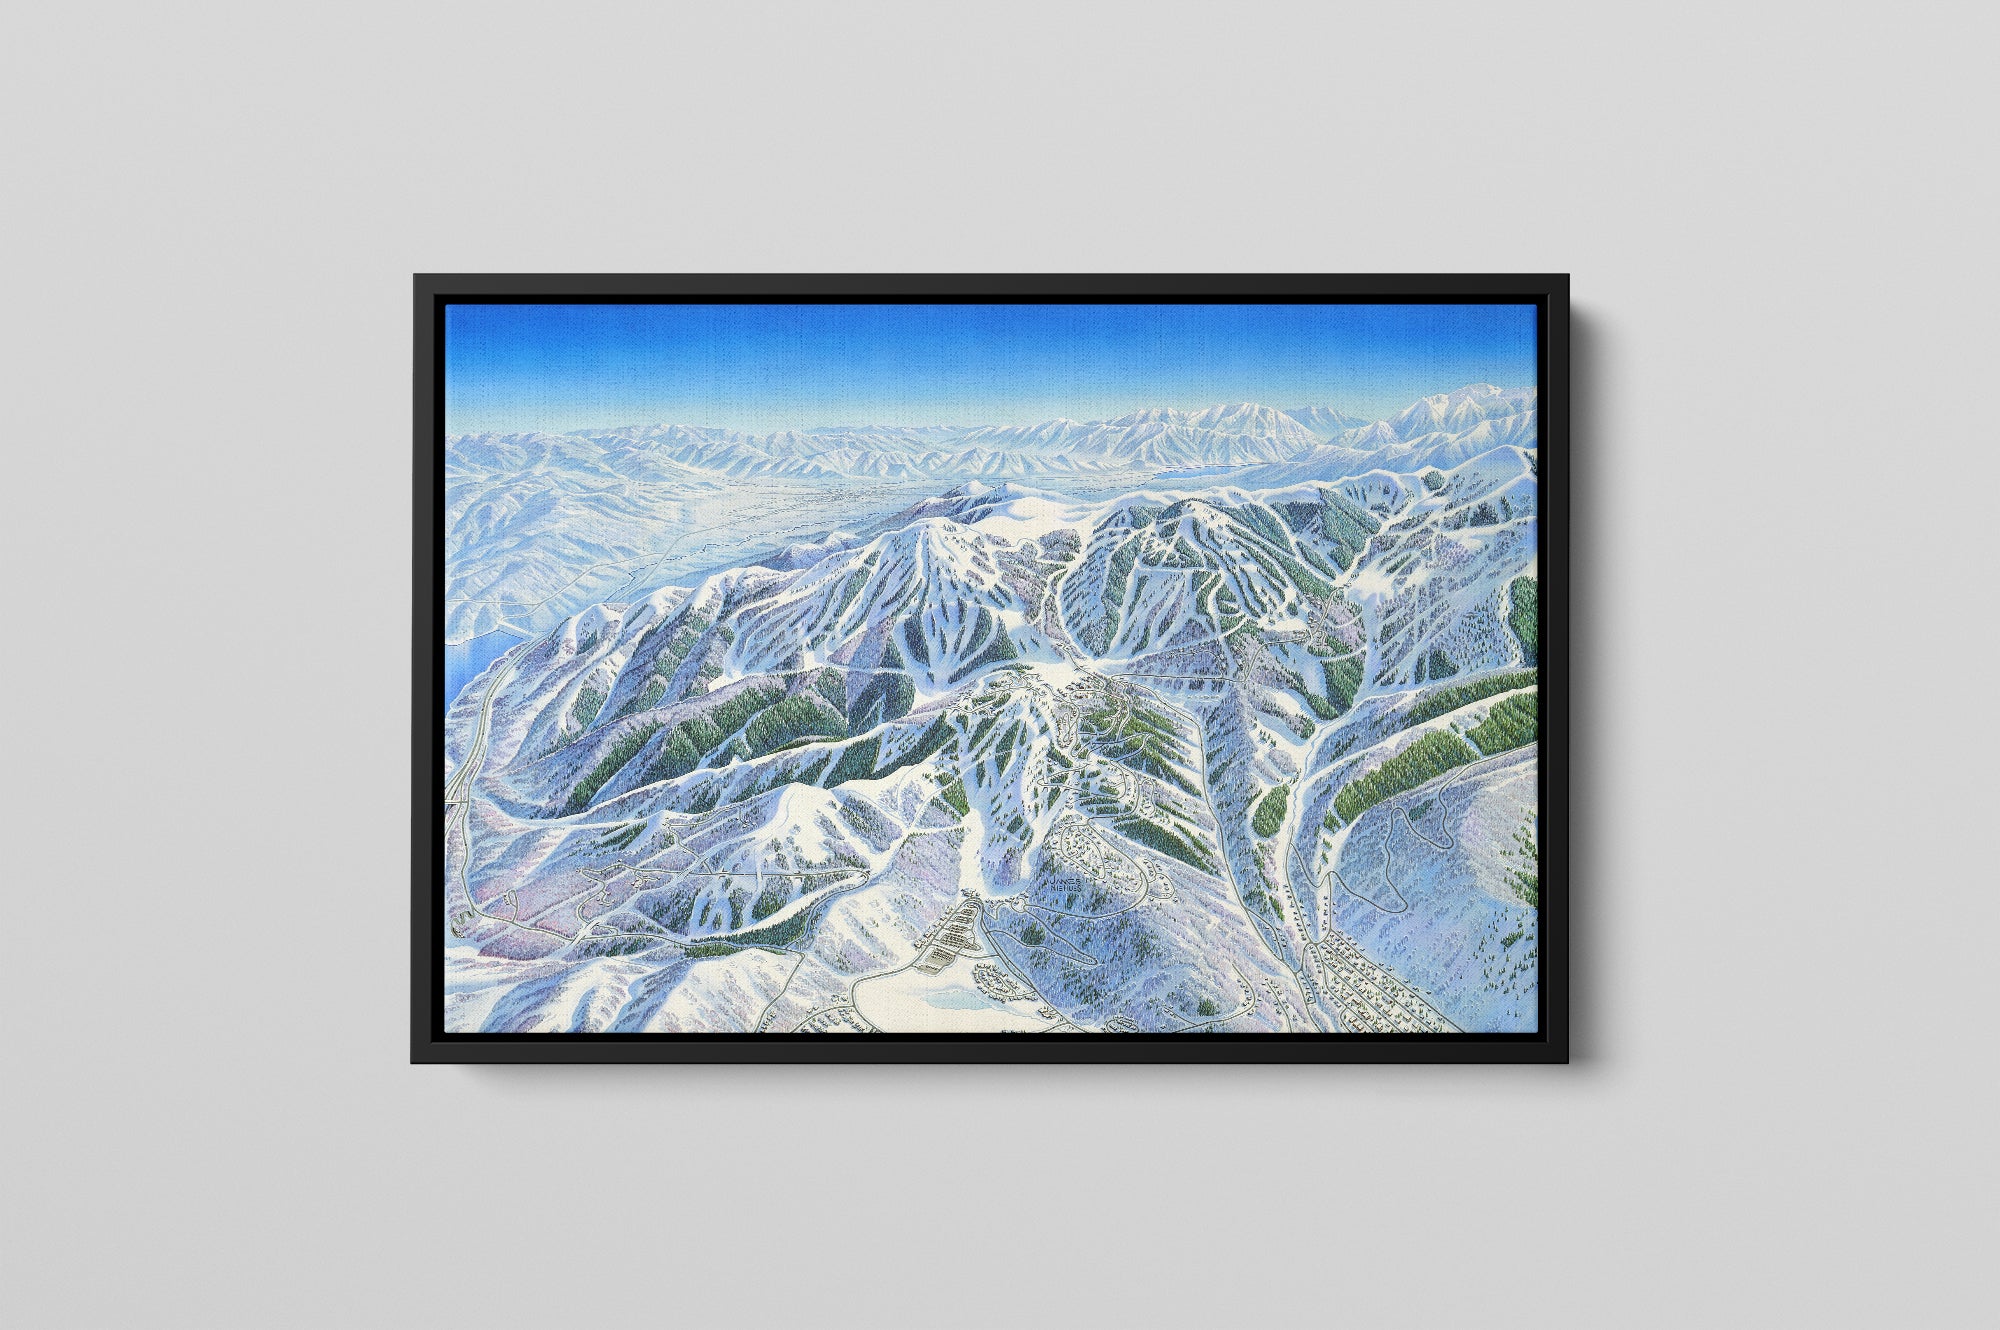 Signed Limited Edition 2007 Deer Valley Canvas